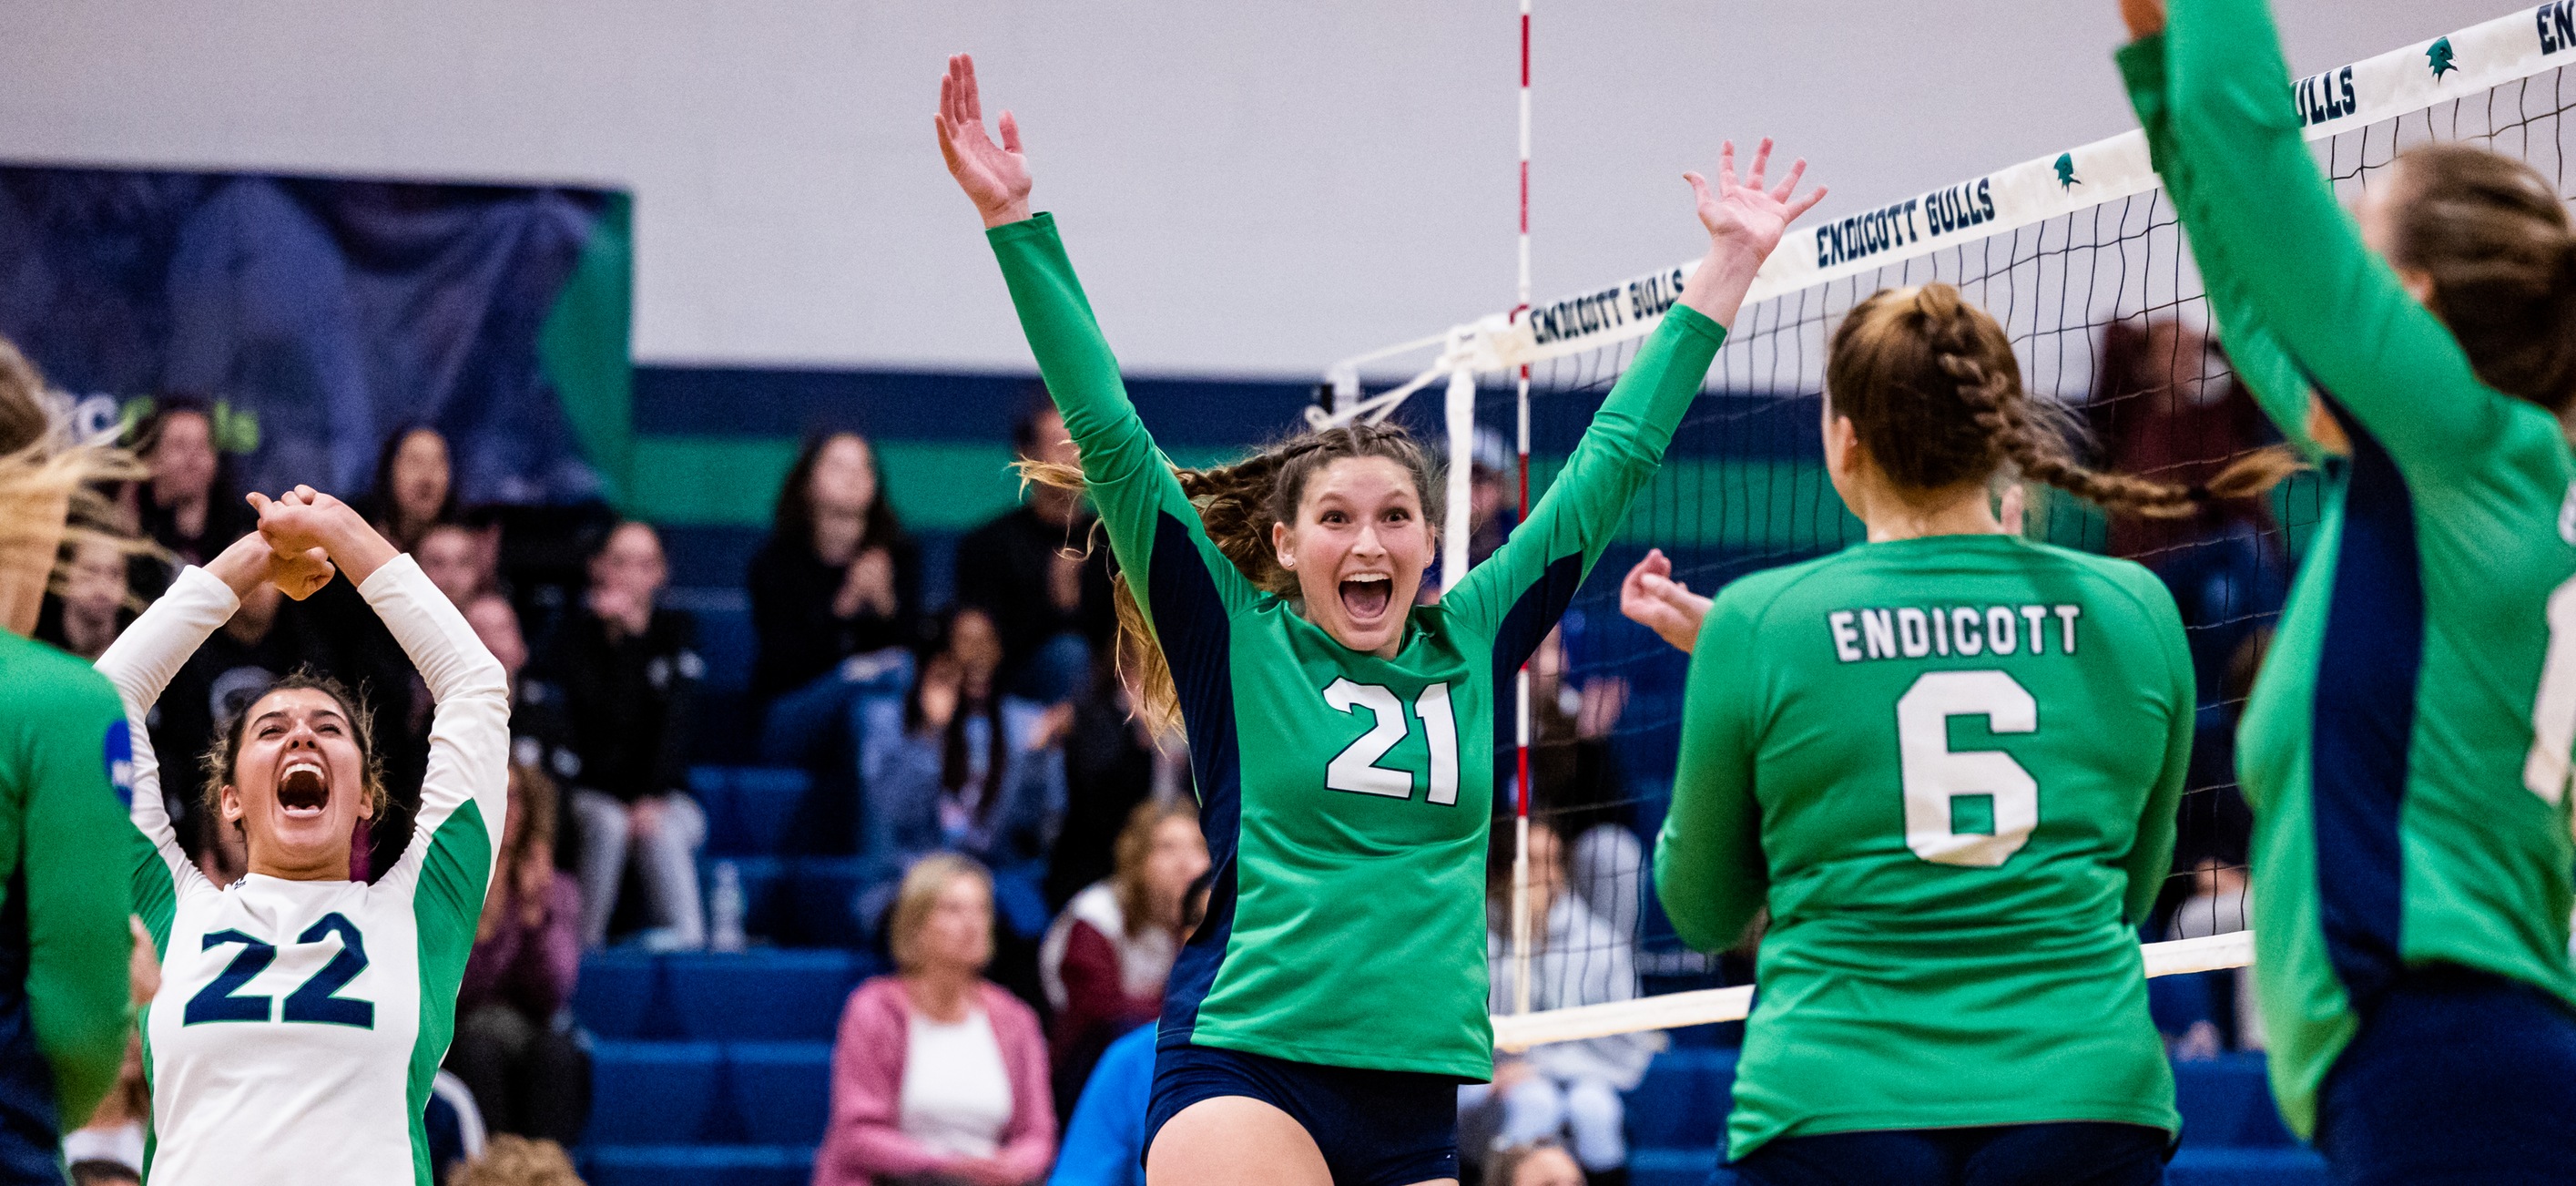 Endicott Sweeps Middlebury to Continue Homecoming Dominance